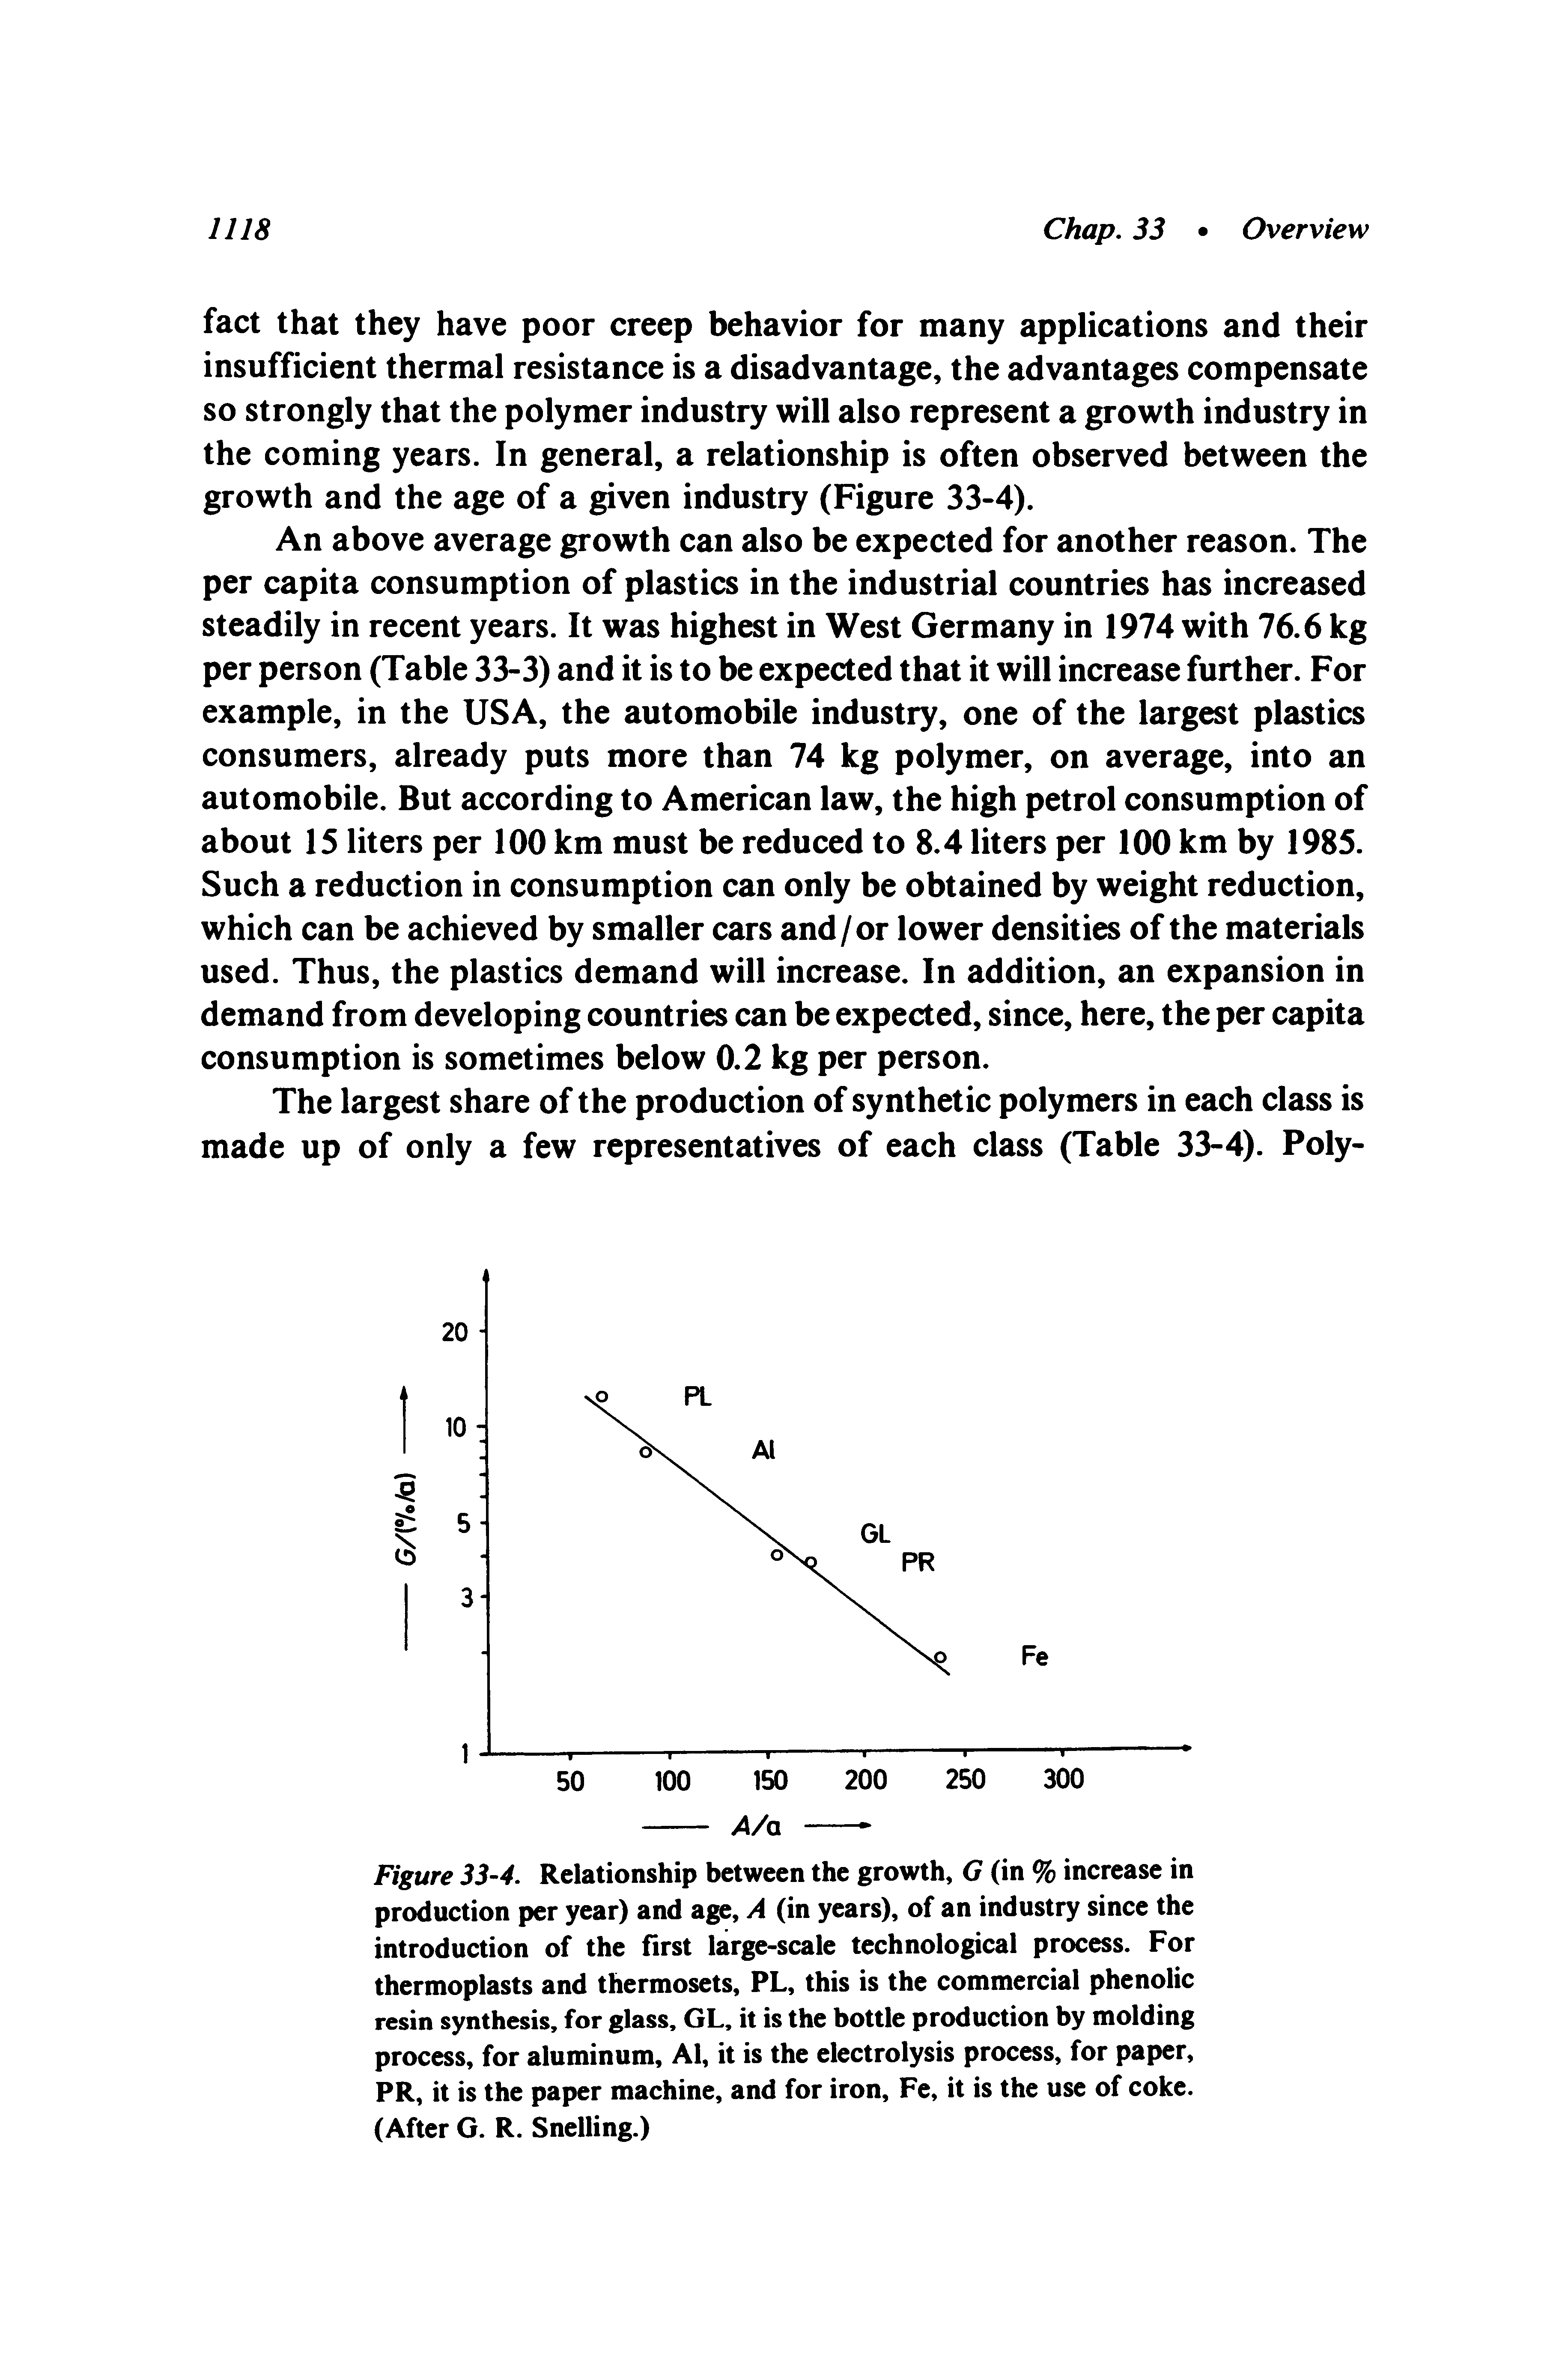 Figure 33-4. Relationship between the growth, G (in % increase in production per year) and age, A (in years), of an industry since the introduction of the first large-scale technological process. For thermoplasts and thermosets, PL, this is the commercial phenolic resin synthesis, for glass, GL, it is the bottle production by molding process, for aluminum, Al, it is the electrolysis process, for paper, PR, it is the paper machine, and for iron, Fe, it is the use of coke. (After G. R. Snelling.)...